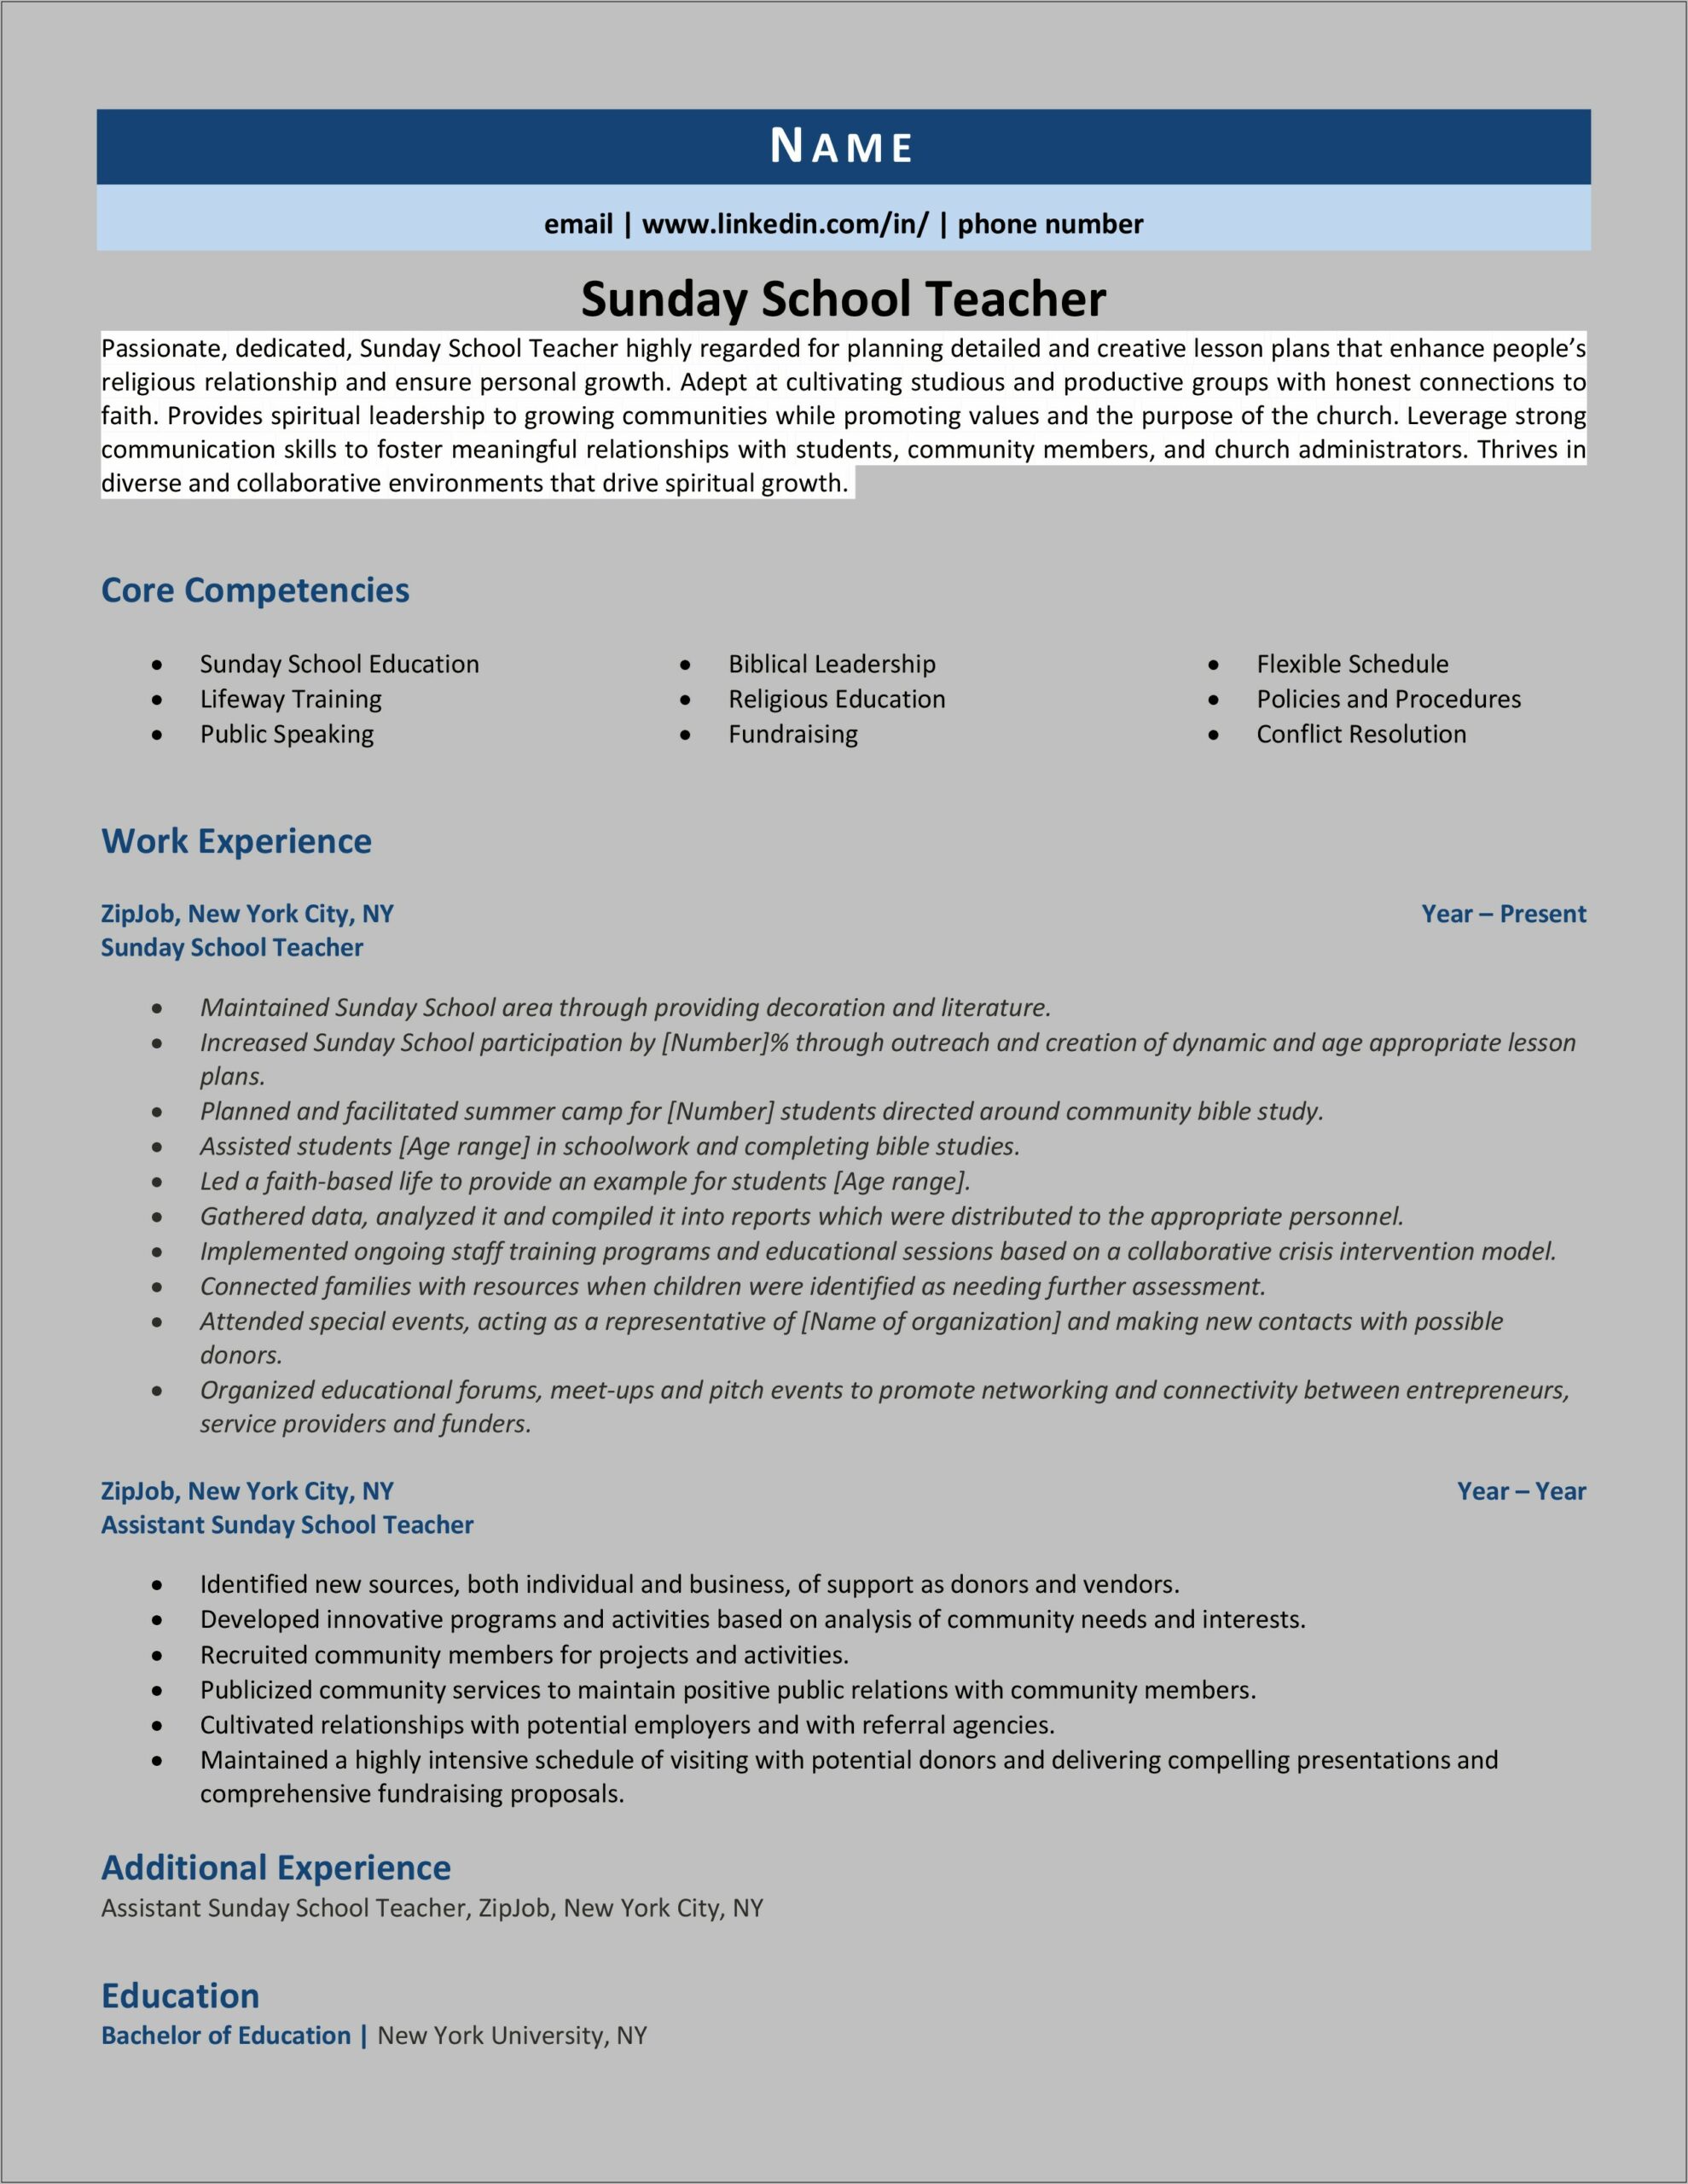 Should I Include Teaching Experience In My Resume